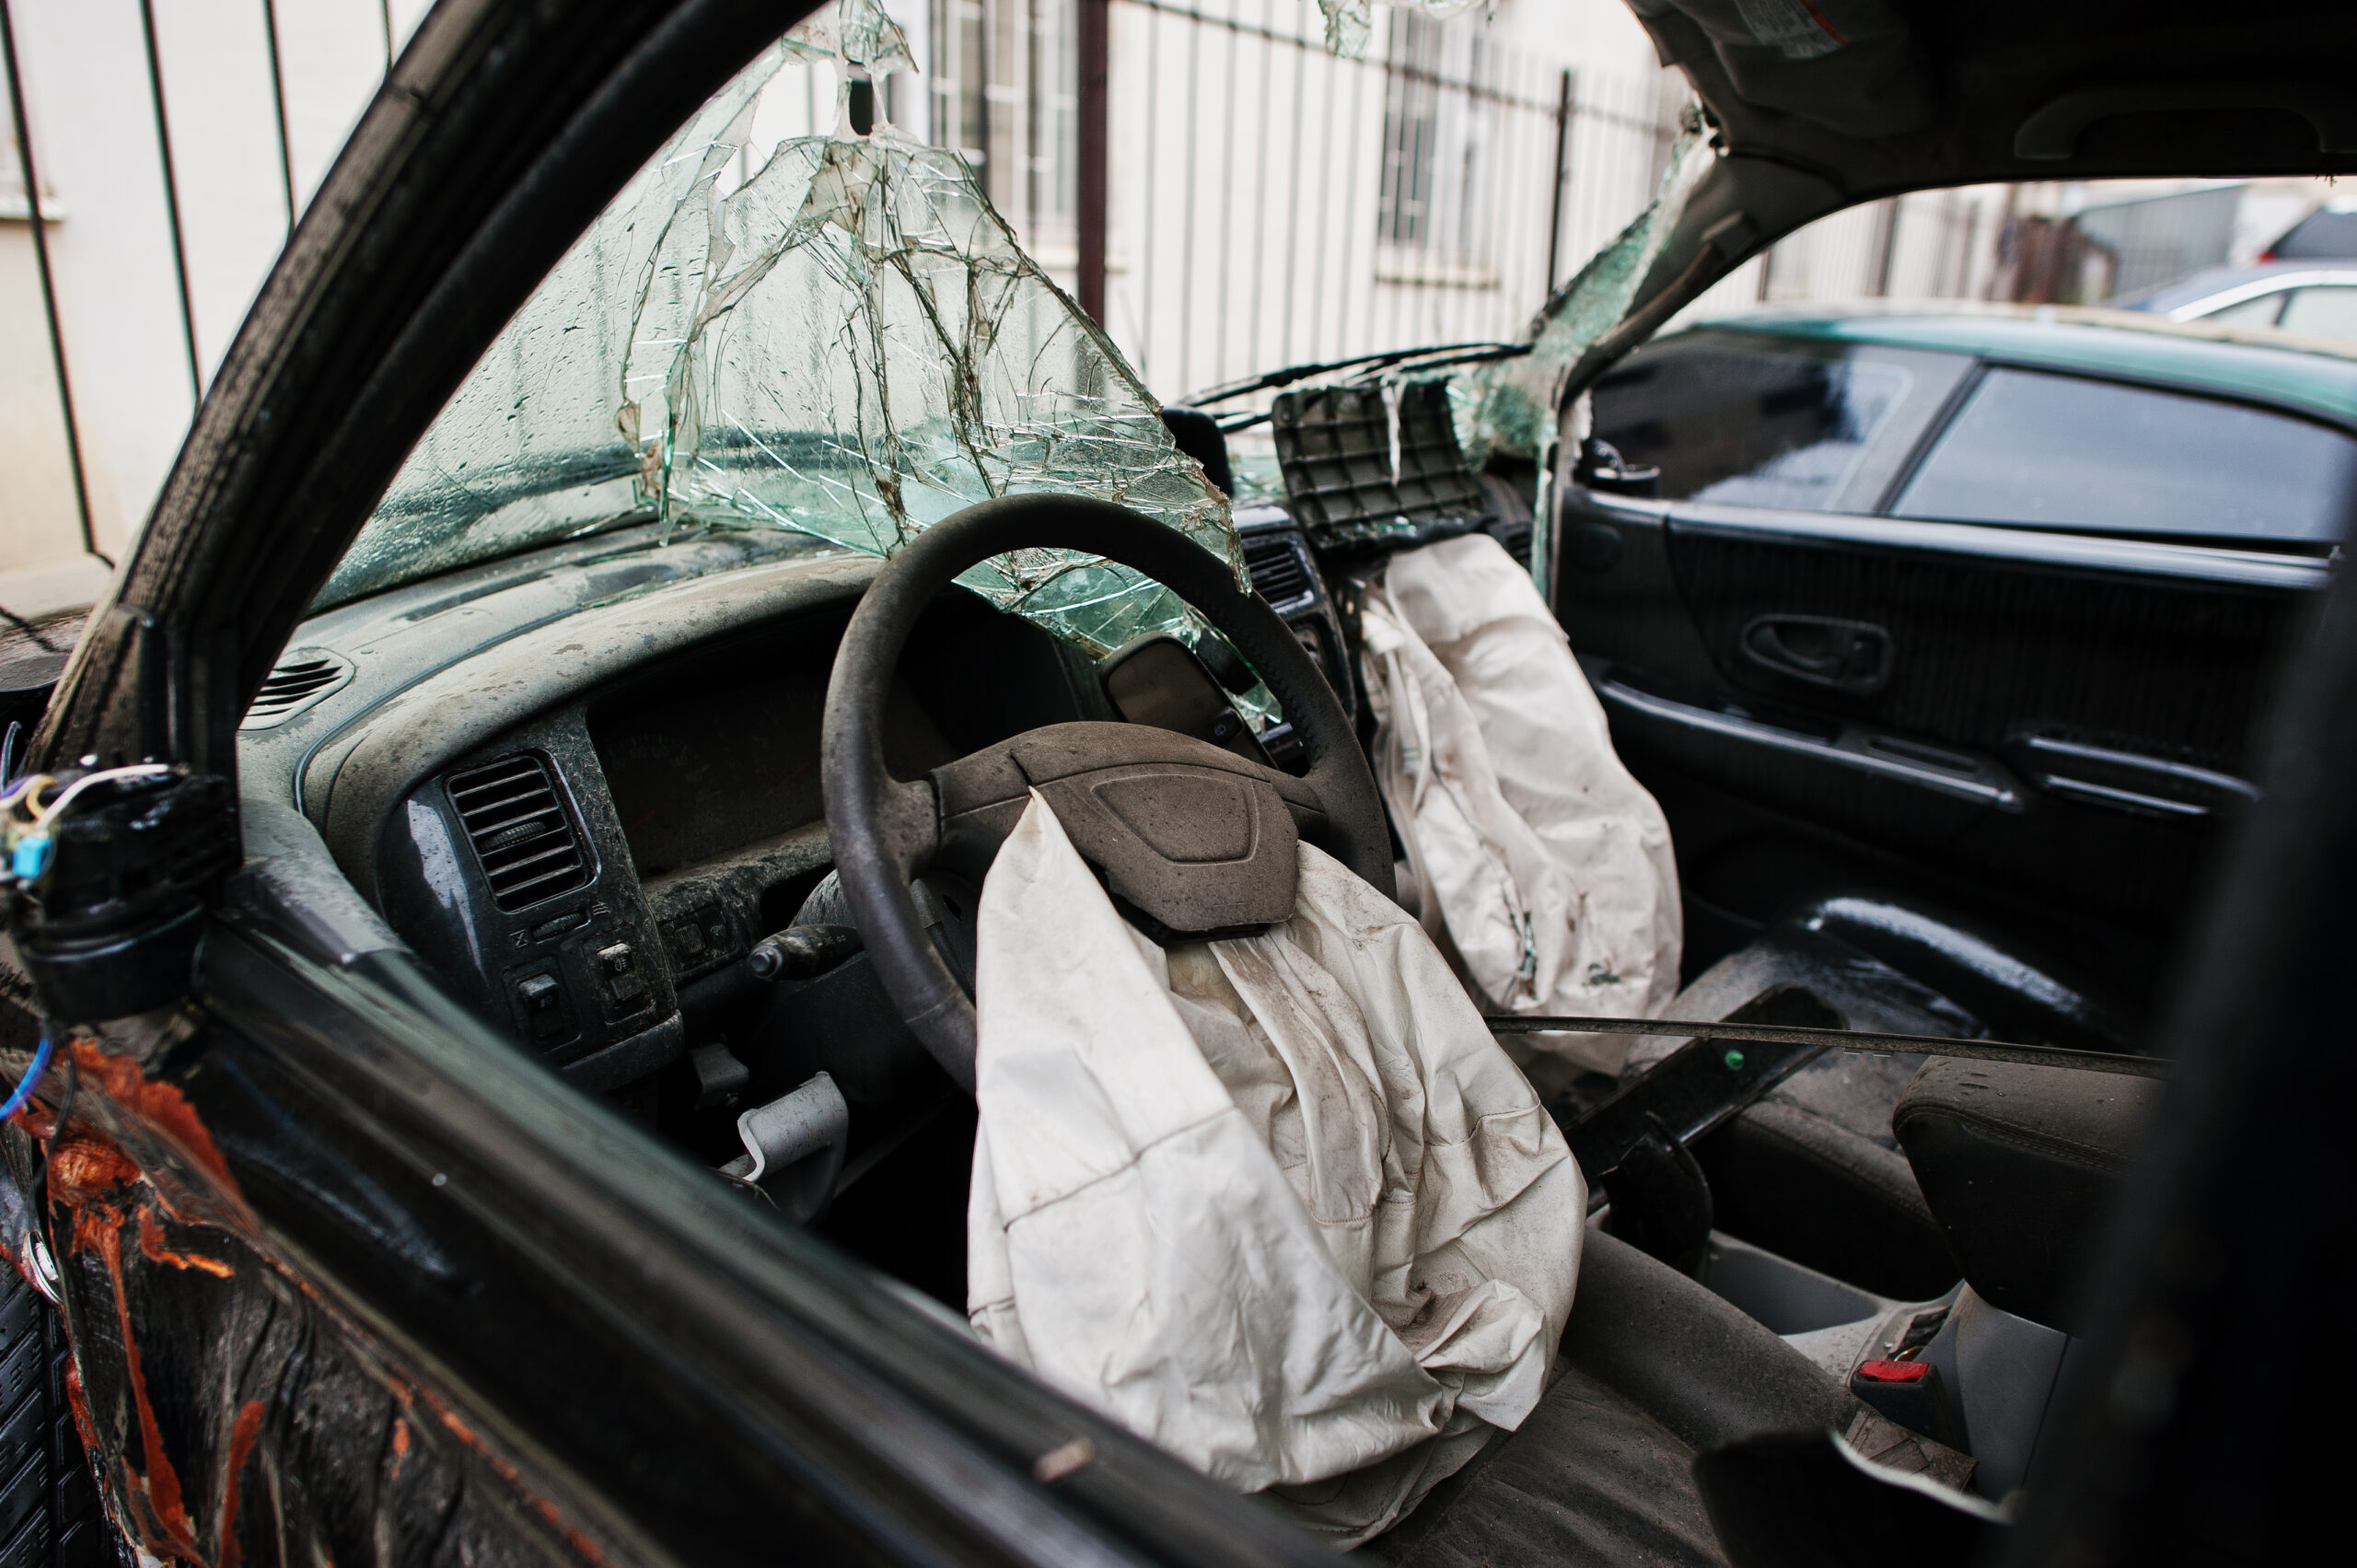 Car after accident. Car interior with airbag after crash